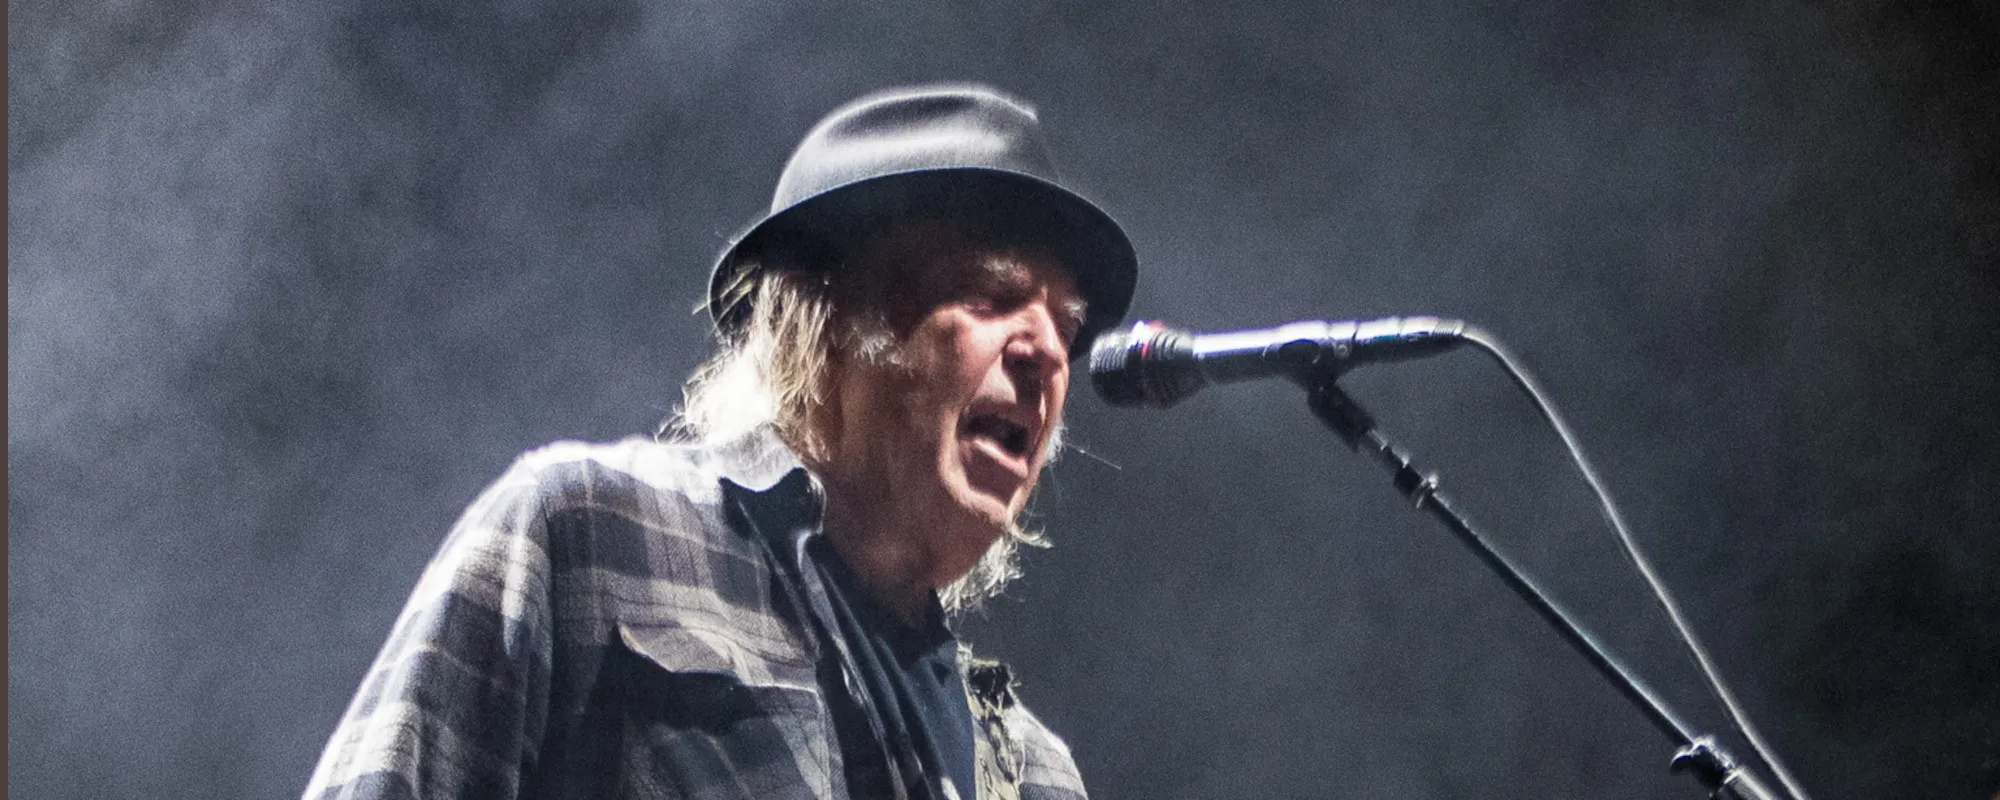 Neil Young Shares David Crosby Tribute: “David is Gone, But His Music Lives On”